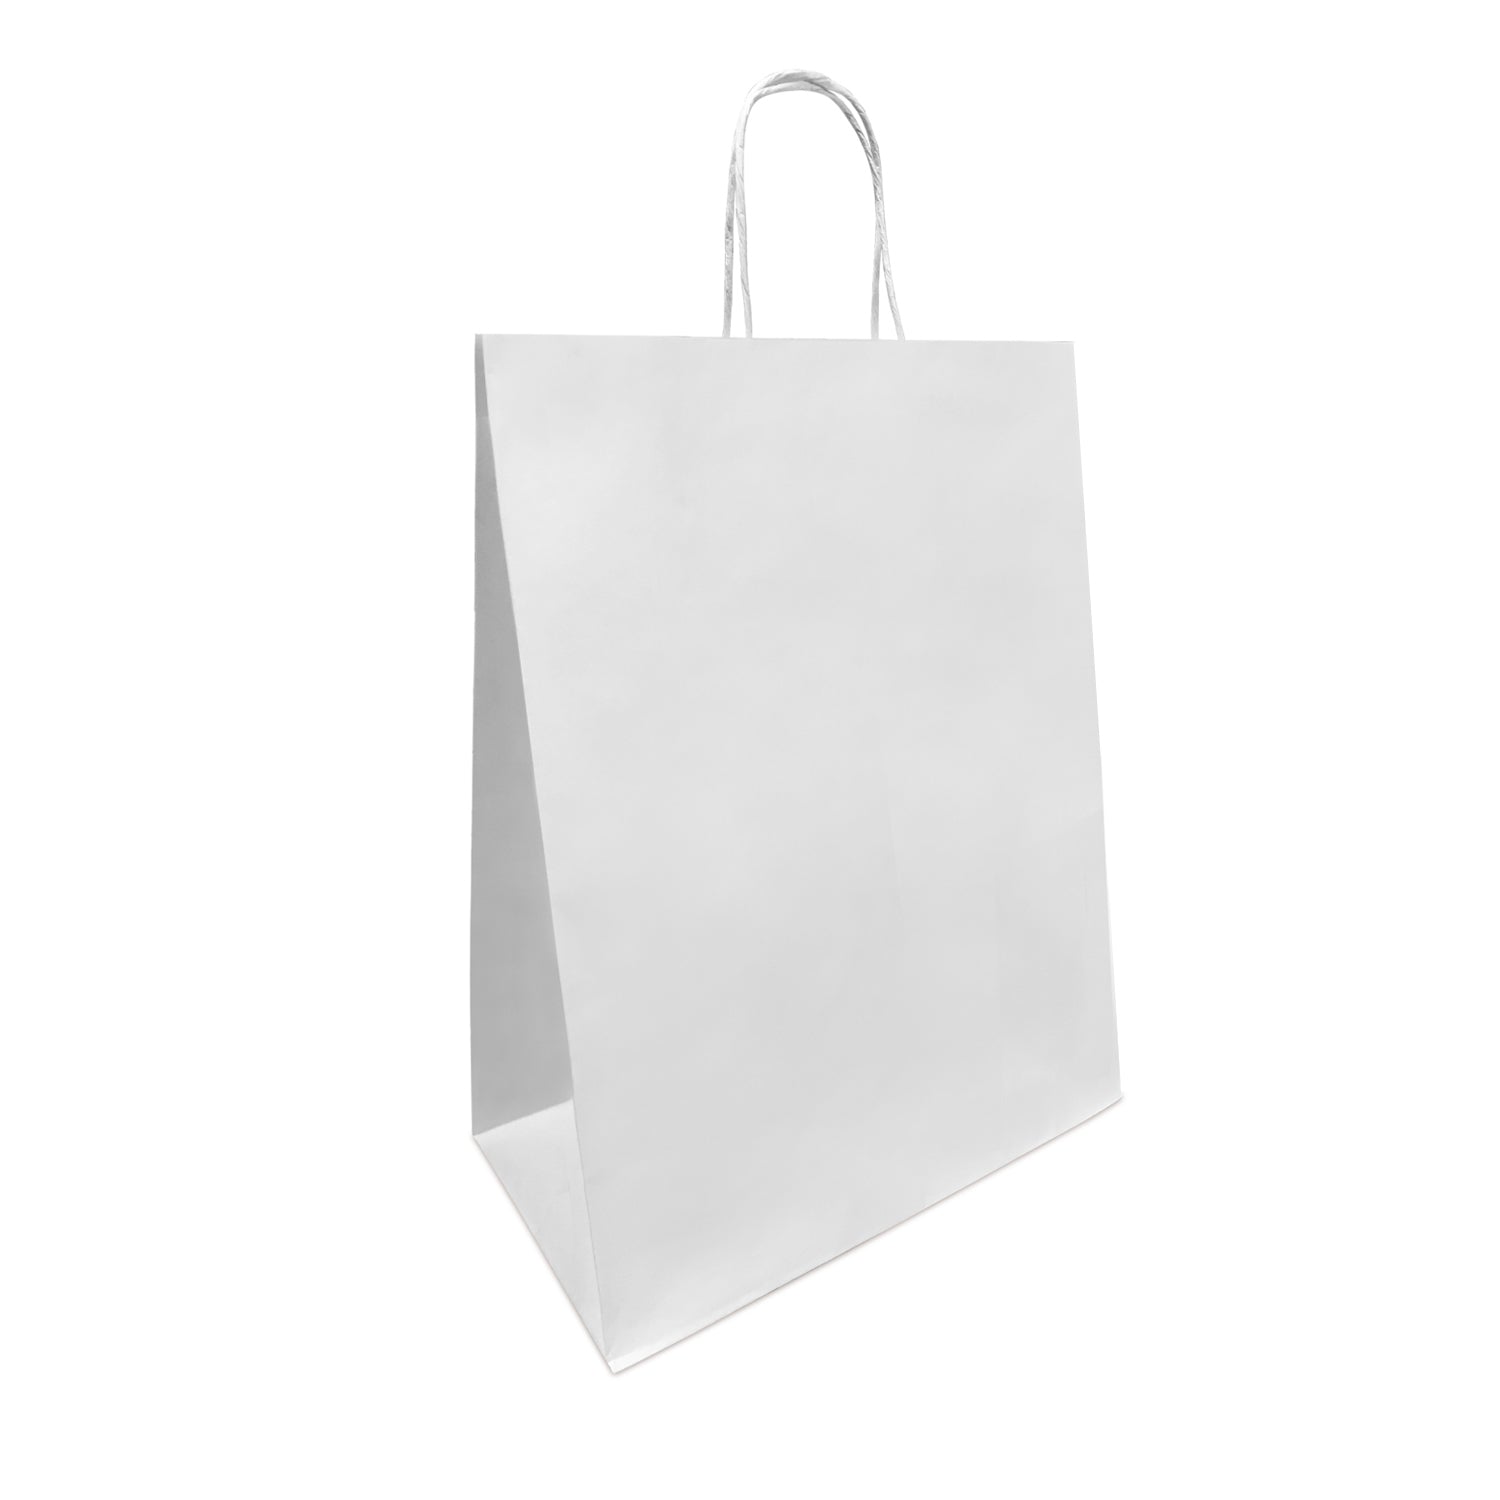 250 Pcs, Mart, 13x7x17 inches, White Kraft Paper Bags, with Twisted Handle